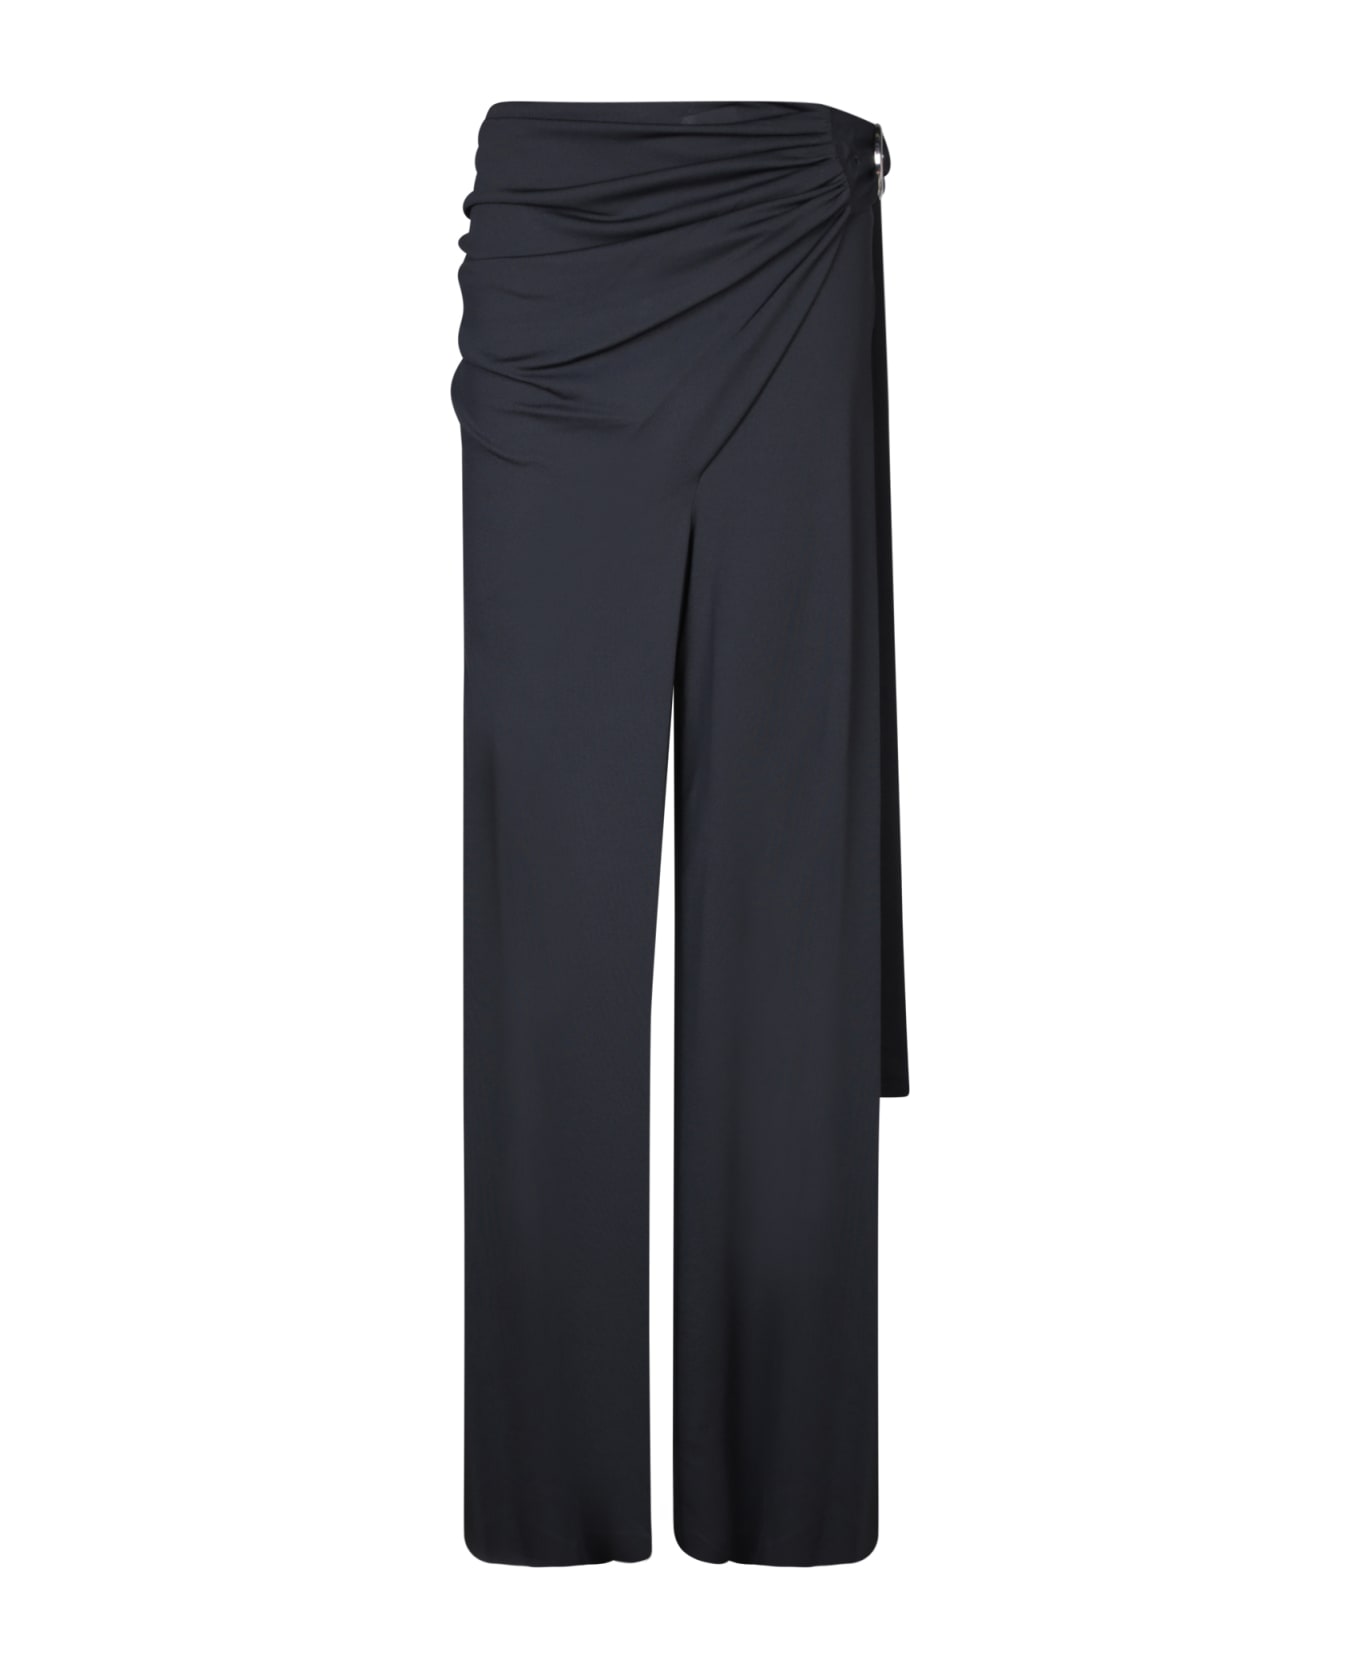 Paco Rabanne Black Jersey Knotted Trousers - Paco Rabanne - Black